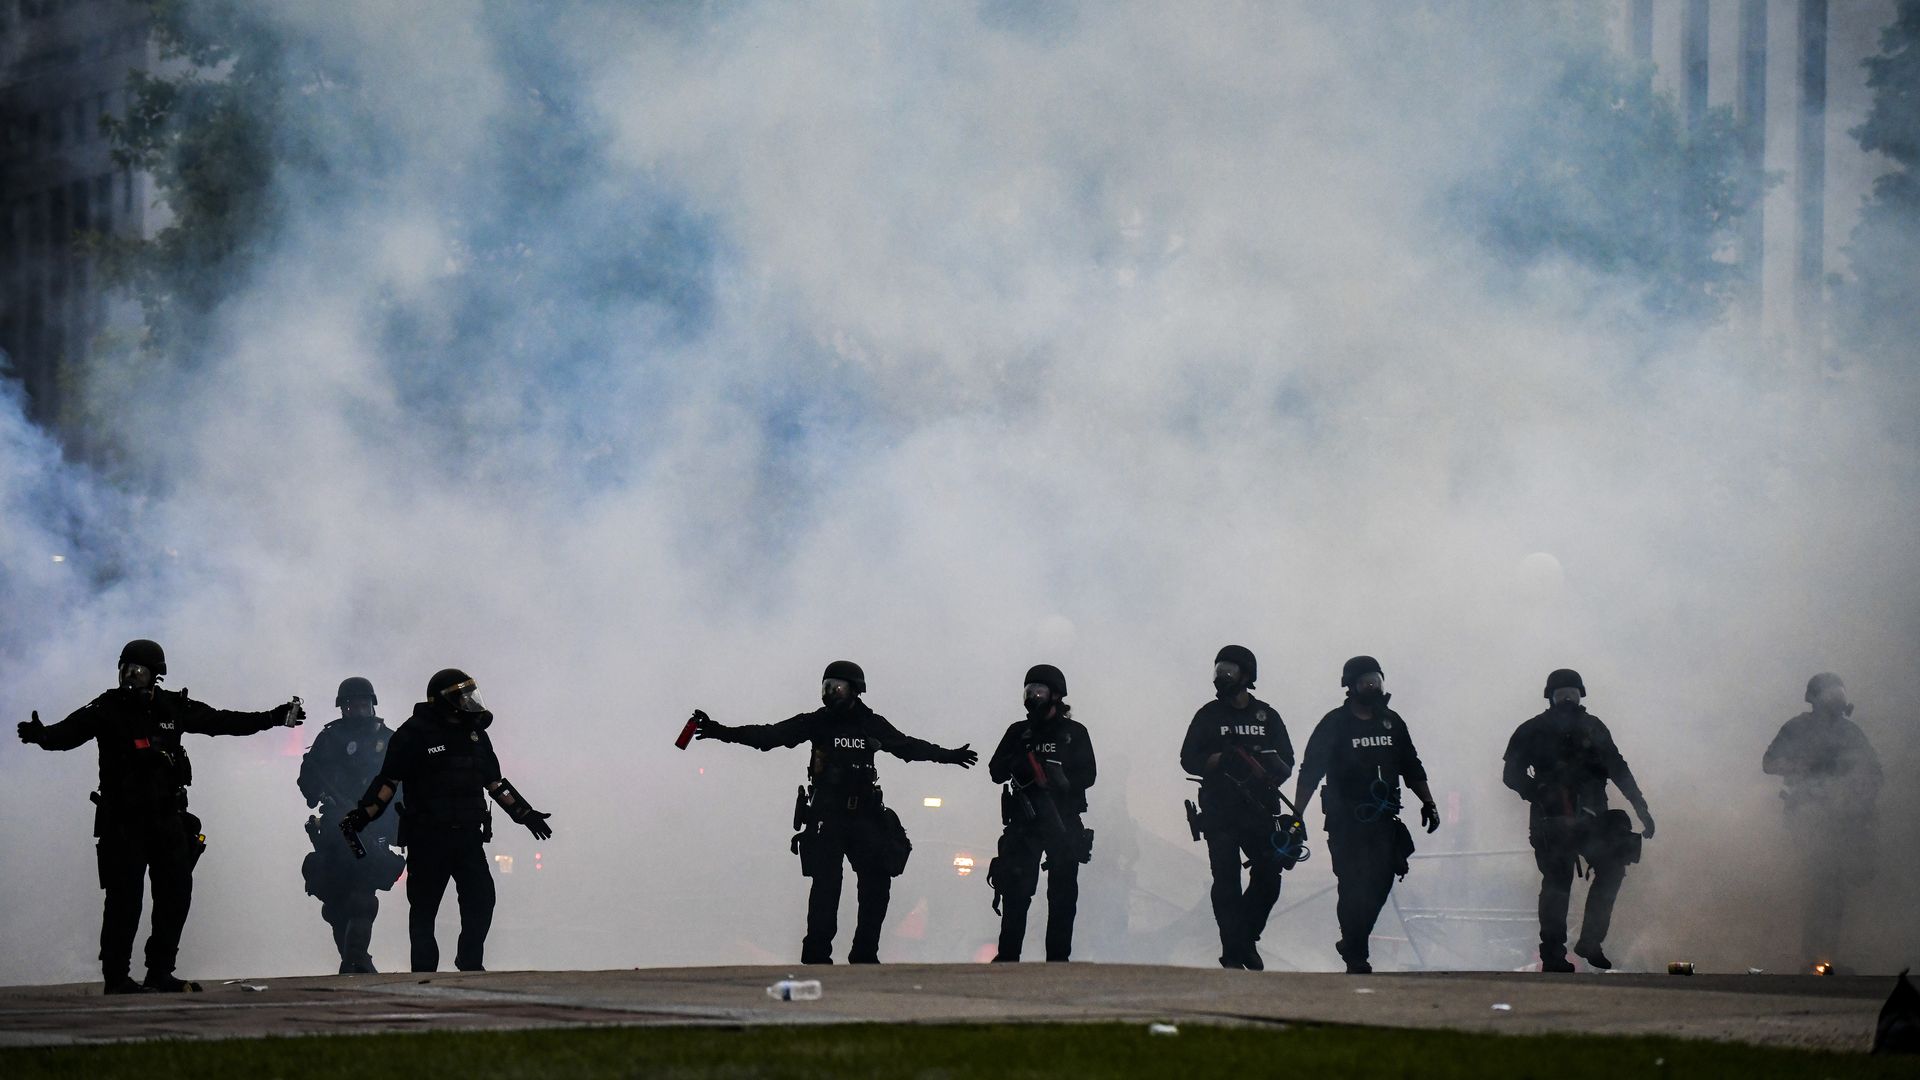 Police officers walk through a cloud of tear gas as they try to disperse people protesting in Denver on May 30, 2020. Photo: Michael Ciaglo/Getty Images